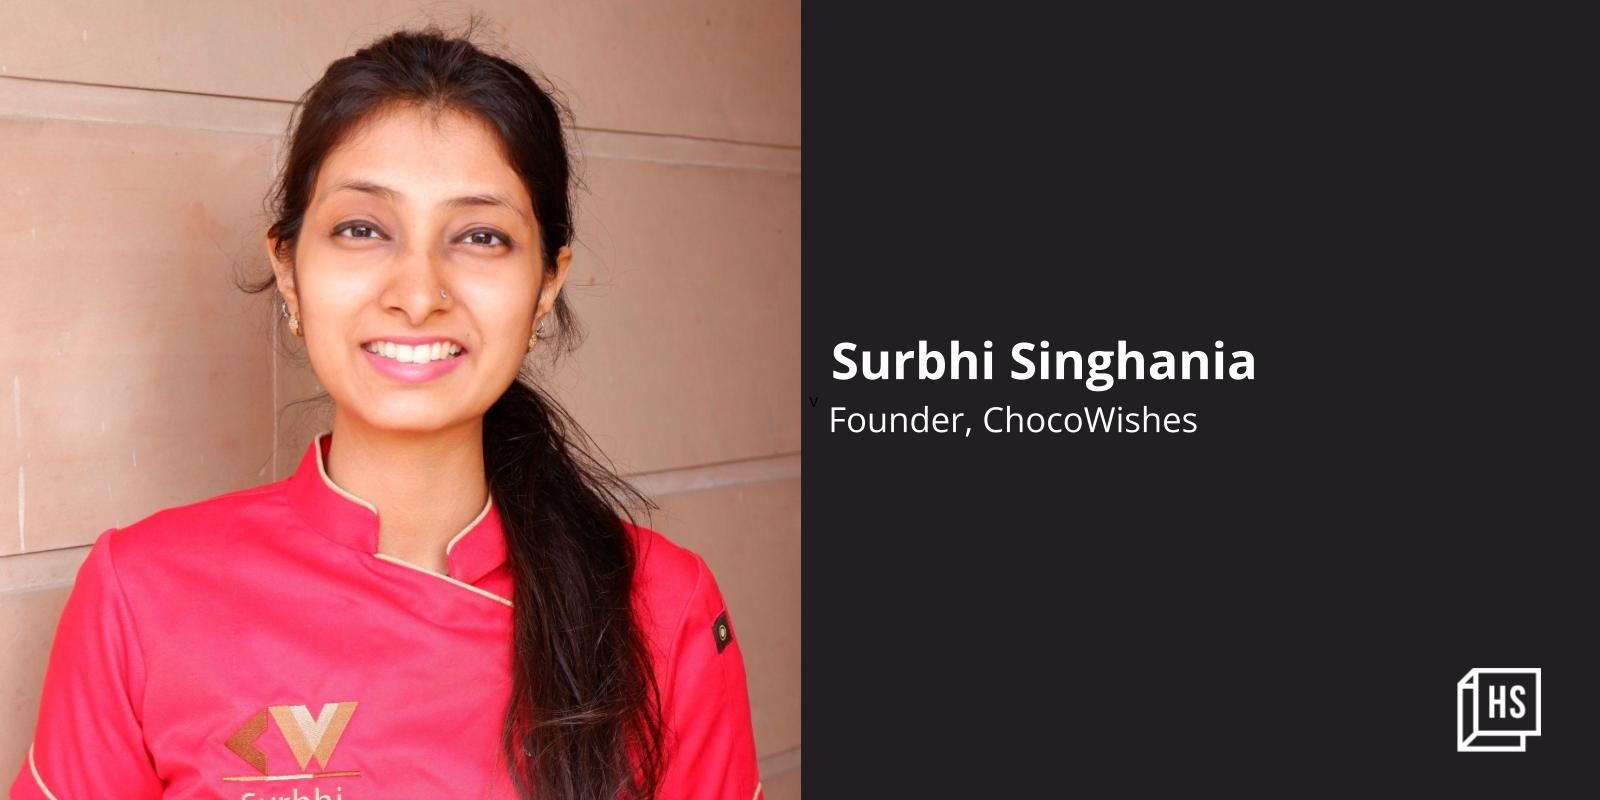 From learning to bake to running a chocolaterie, Surbhi has come a long way